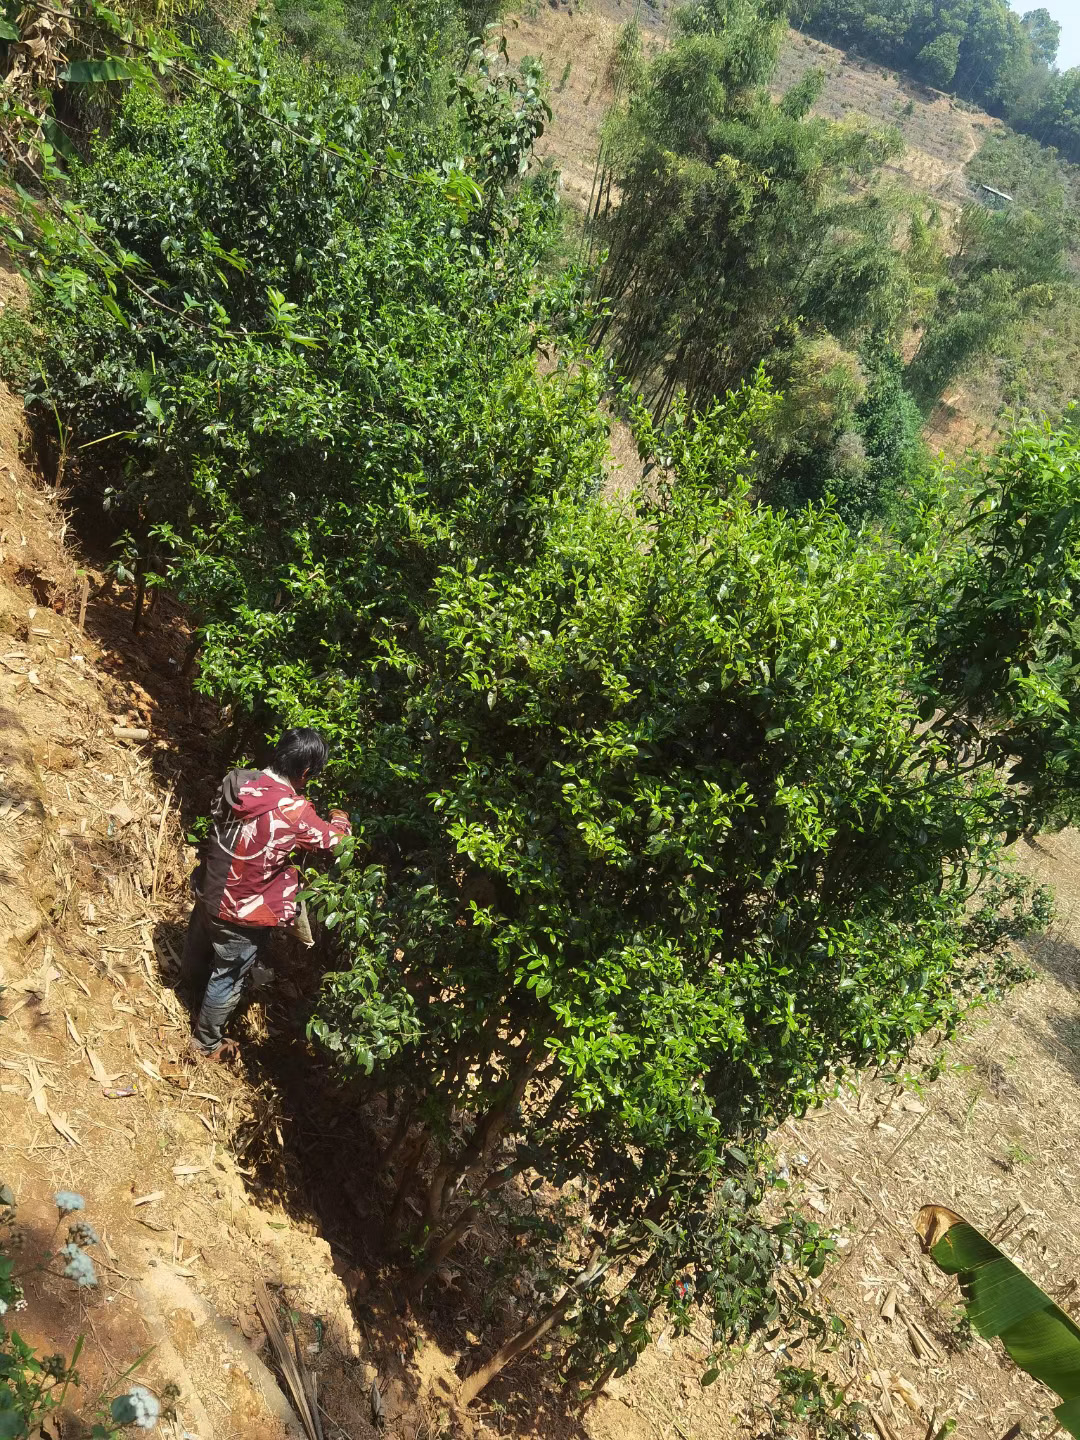 A person standing on a hillside to reach the leaves on the higher branches of a large Camellia taliensis tea tree with lots of green spring leaves.